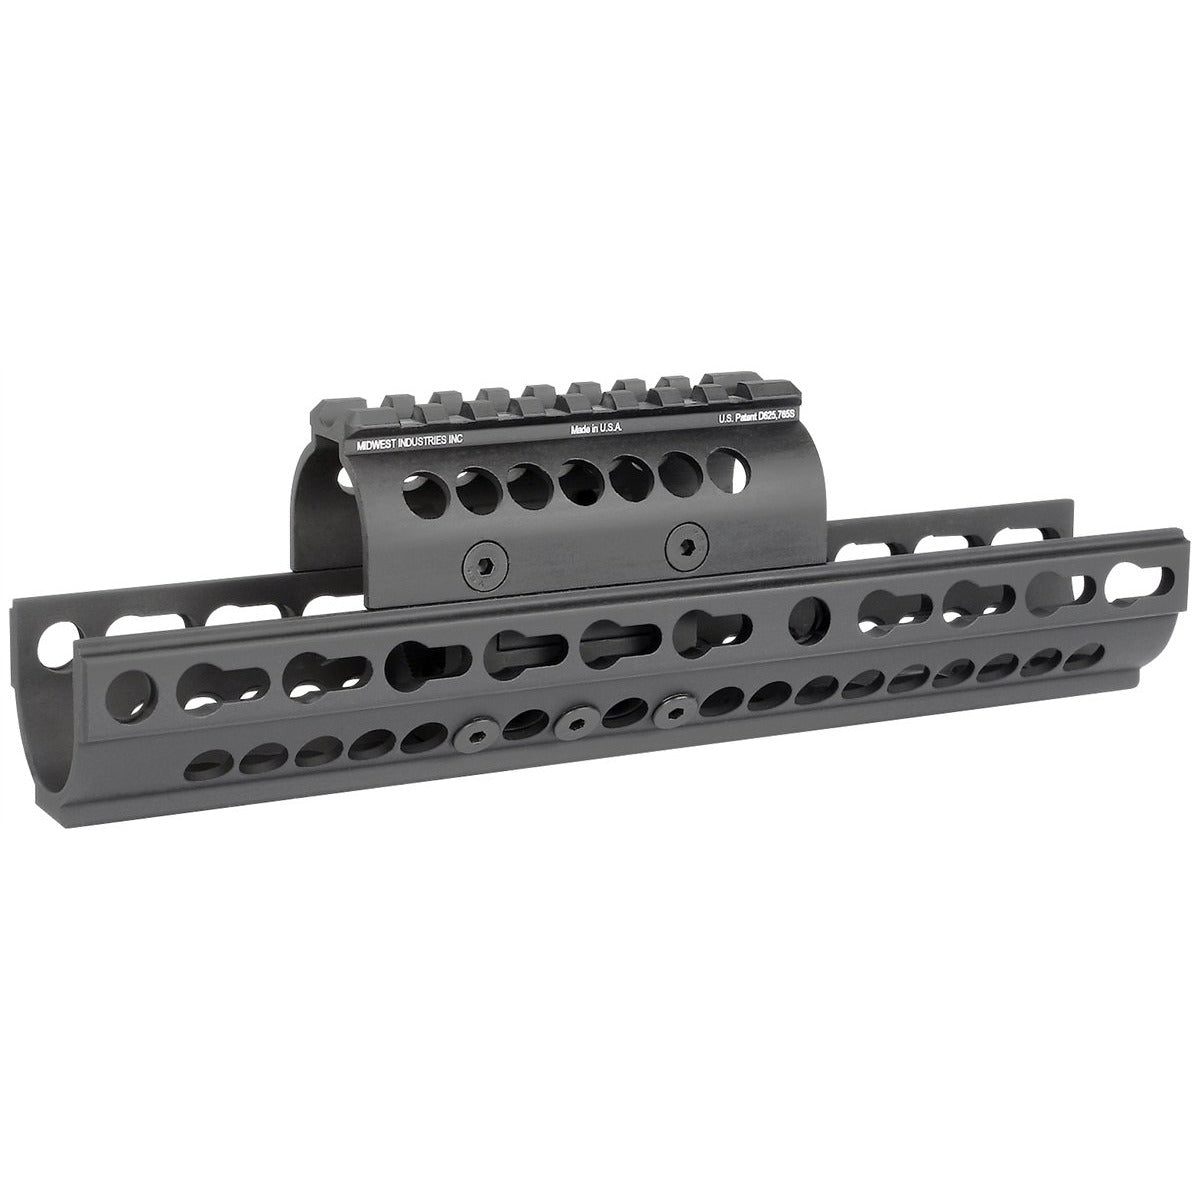 Midwest Industries AK-47/74 Extended SS KeyMod Handguard with Picatinn ...